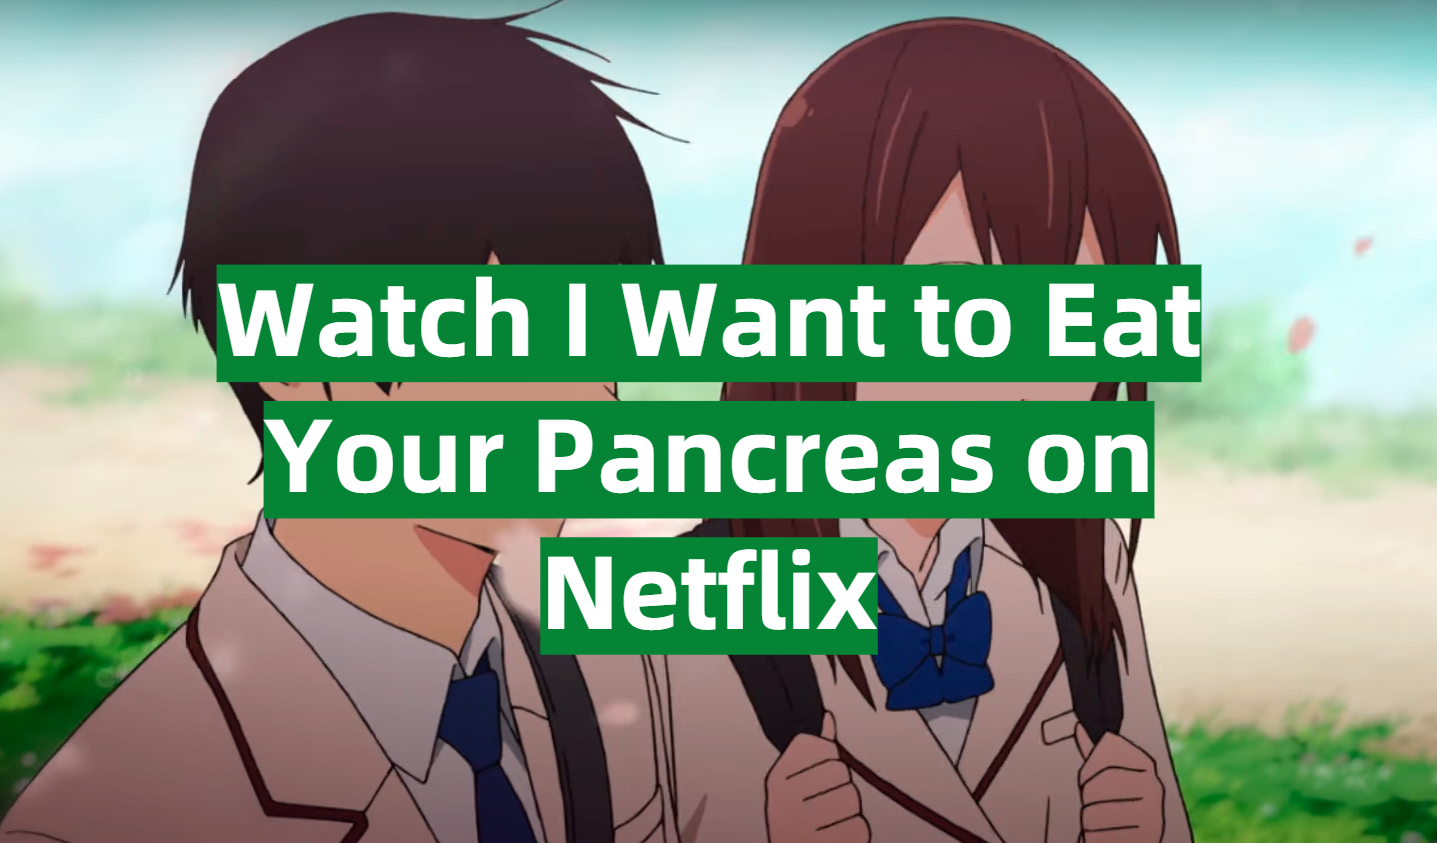 Watch I Want to Eat Your Pancreas on Netflix - VPNProfy